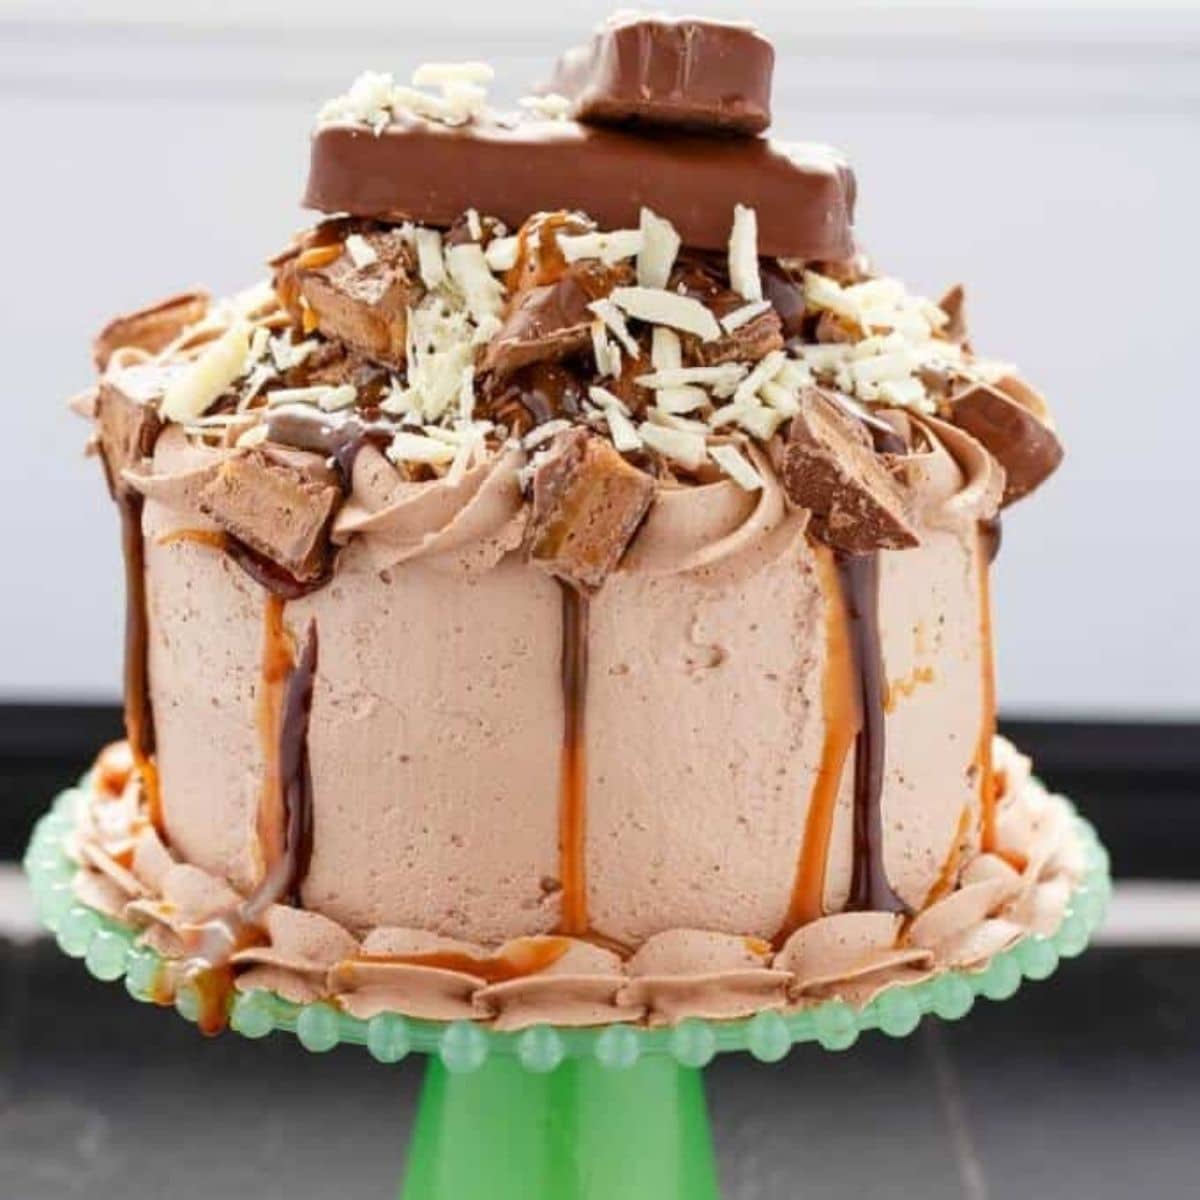 How To Make A Chocolate Explosion Cake With Chocolate Bars!